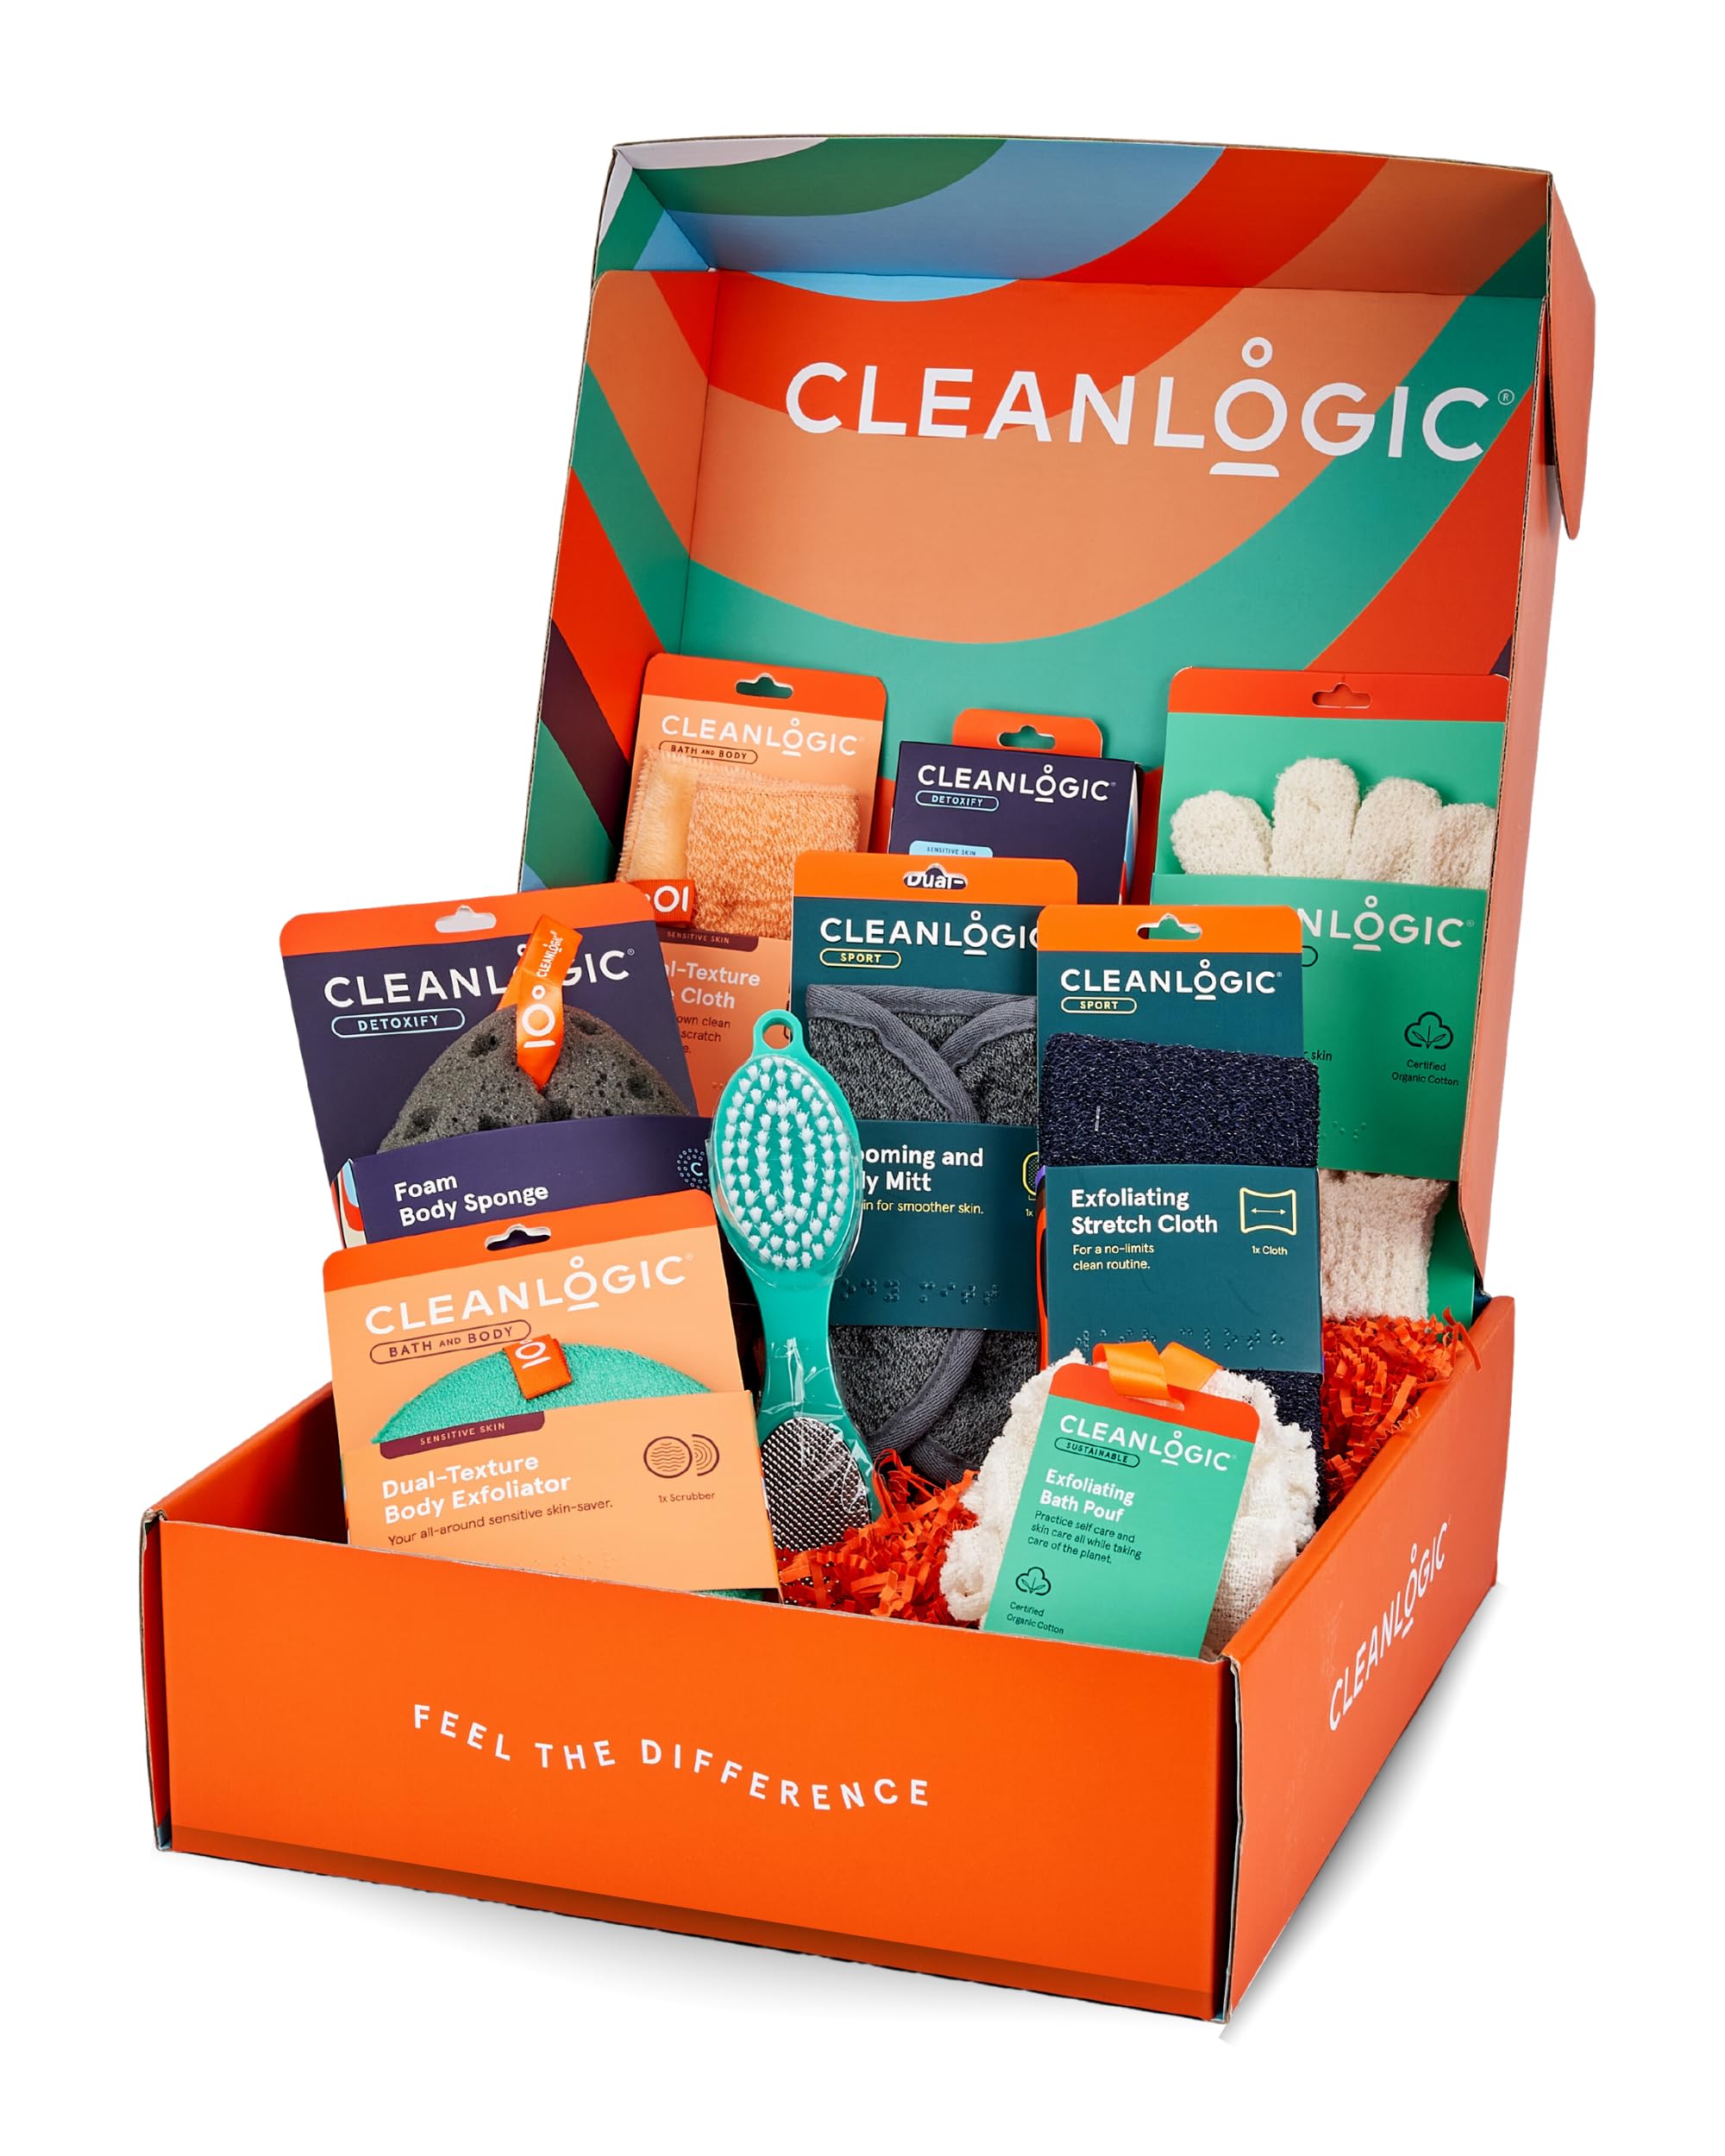 Cleanlogic Complete Home Spa Kit, Skin Care Gift for Women & Men, Exfoliating Body Scrubber, Face Exfoliator Pads, Shower Pouf & More, 9 Count